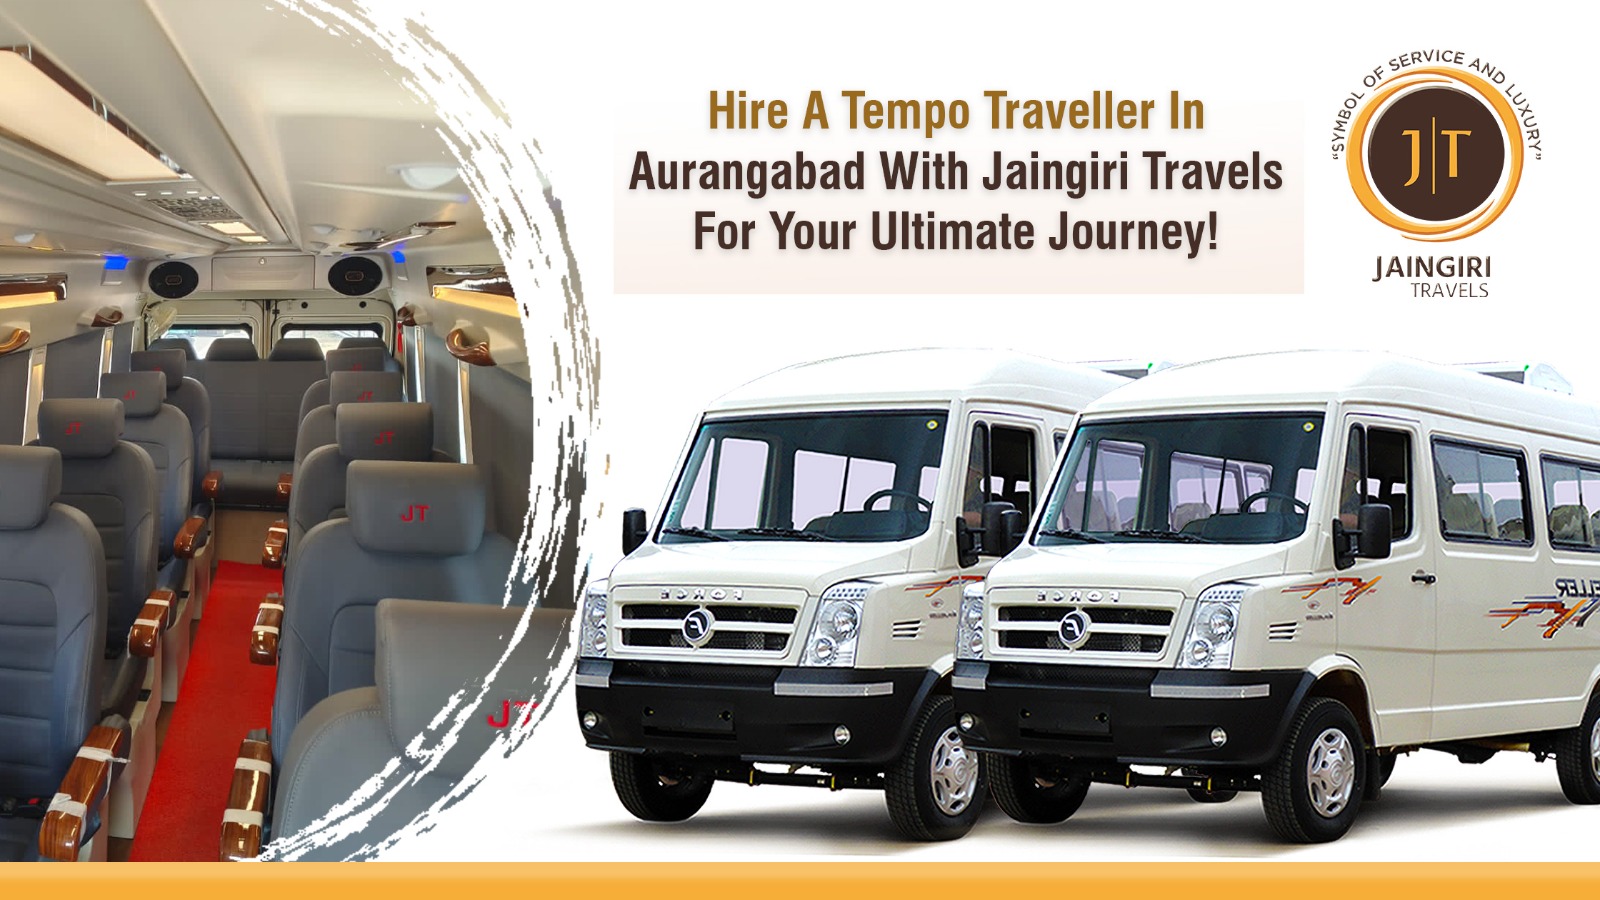 Hire a Tempo Traveller in Aurangabad with Jaingiri Travels for Your Ultimate Journey!